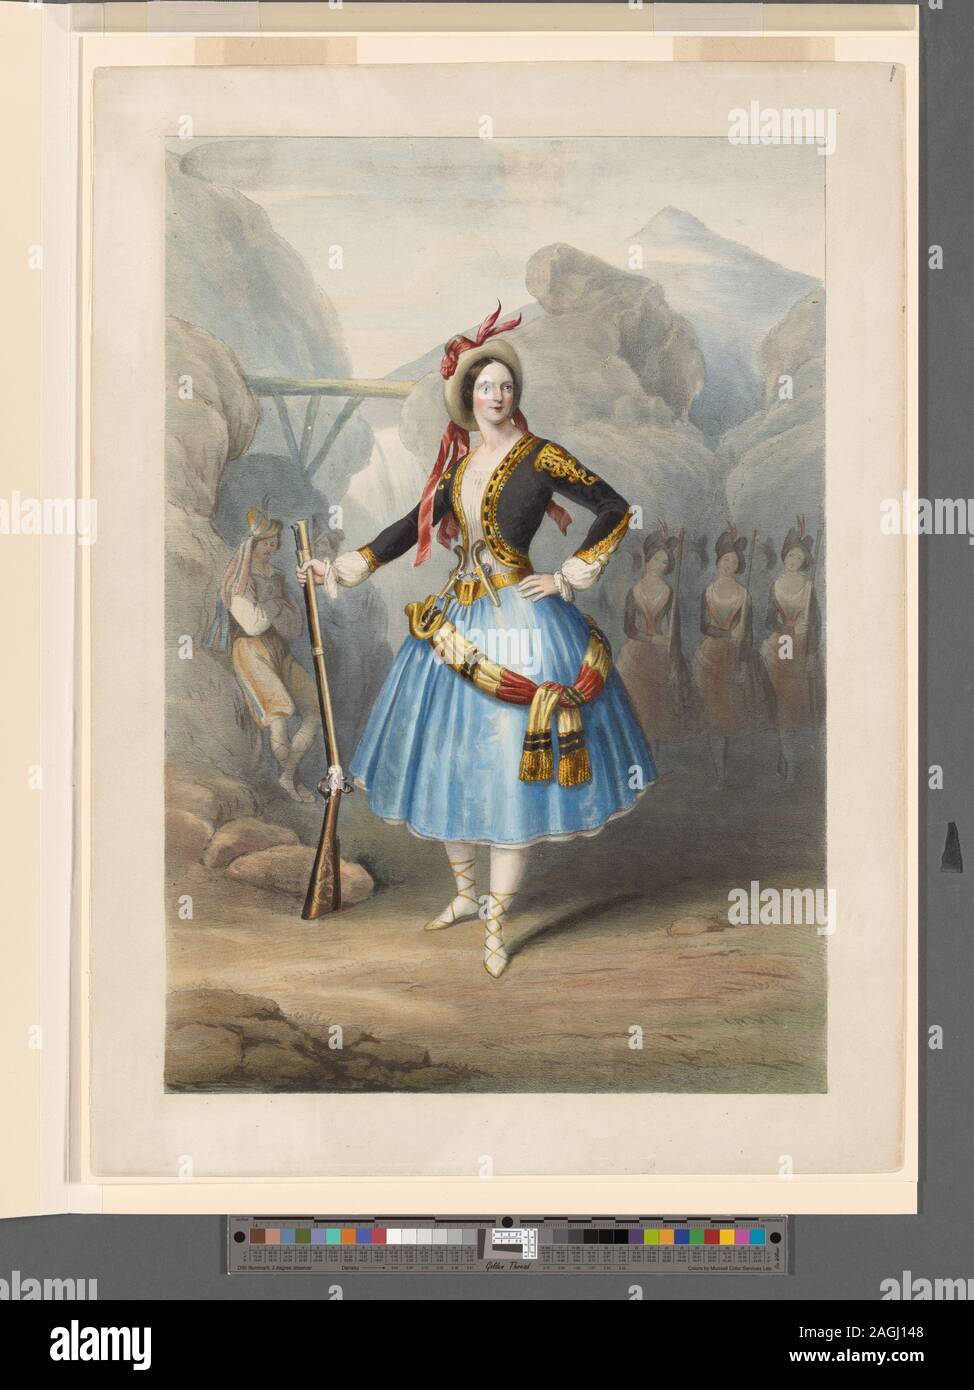 Full-length to left, looking right, left hand at waist, right hand holding musket. Women troups in right background. Rocky terrain and waterfall in background.; Lucile Grahn in Catarina; ou La fille du bandit. Stock Photo